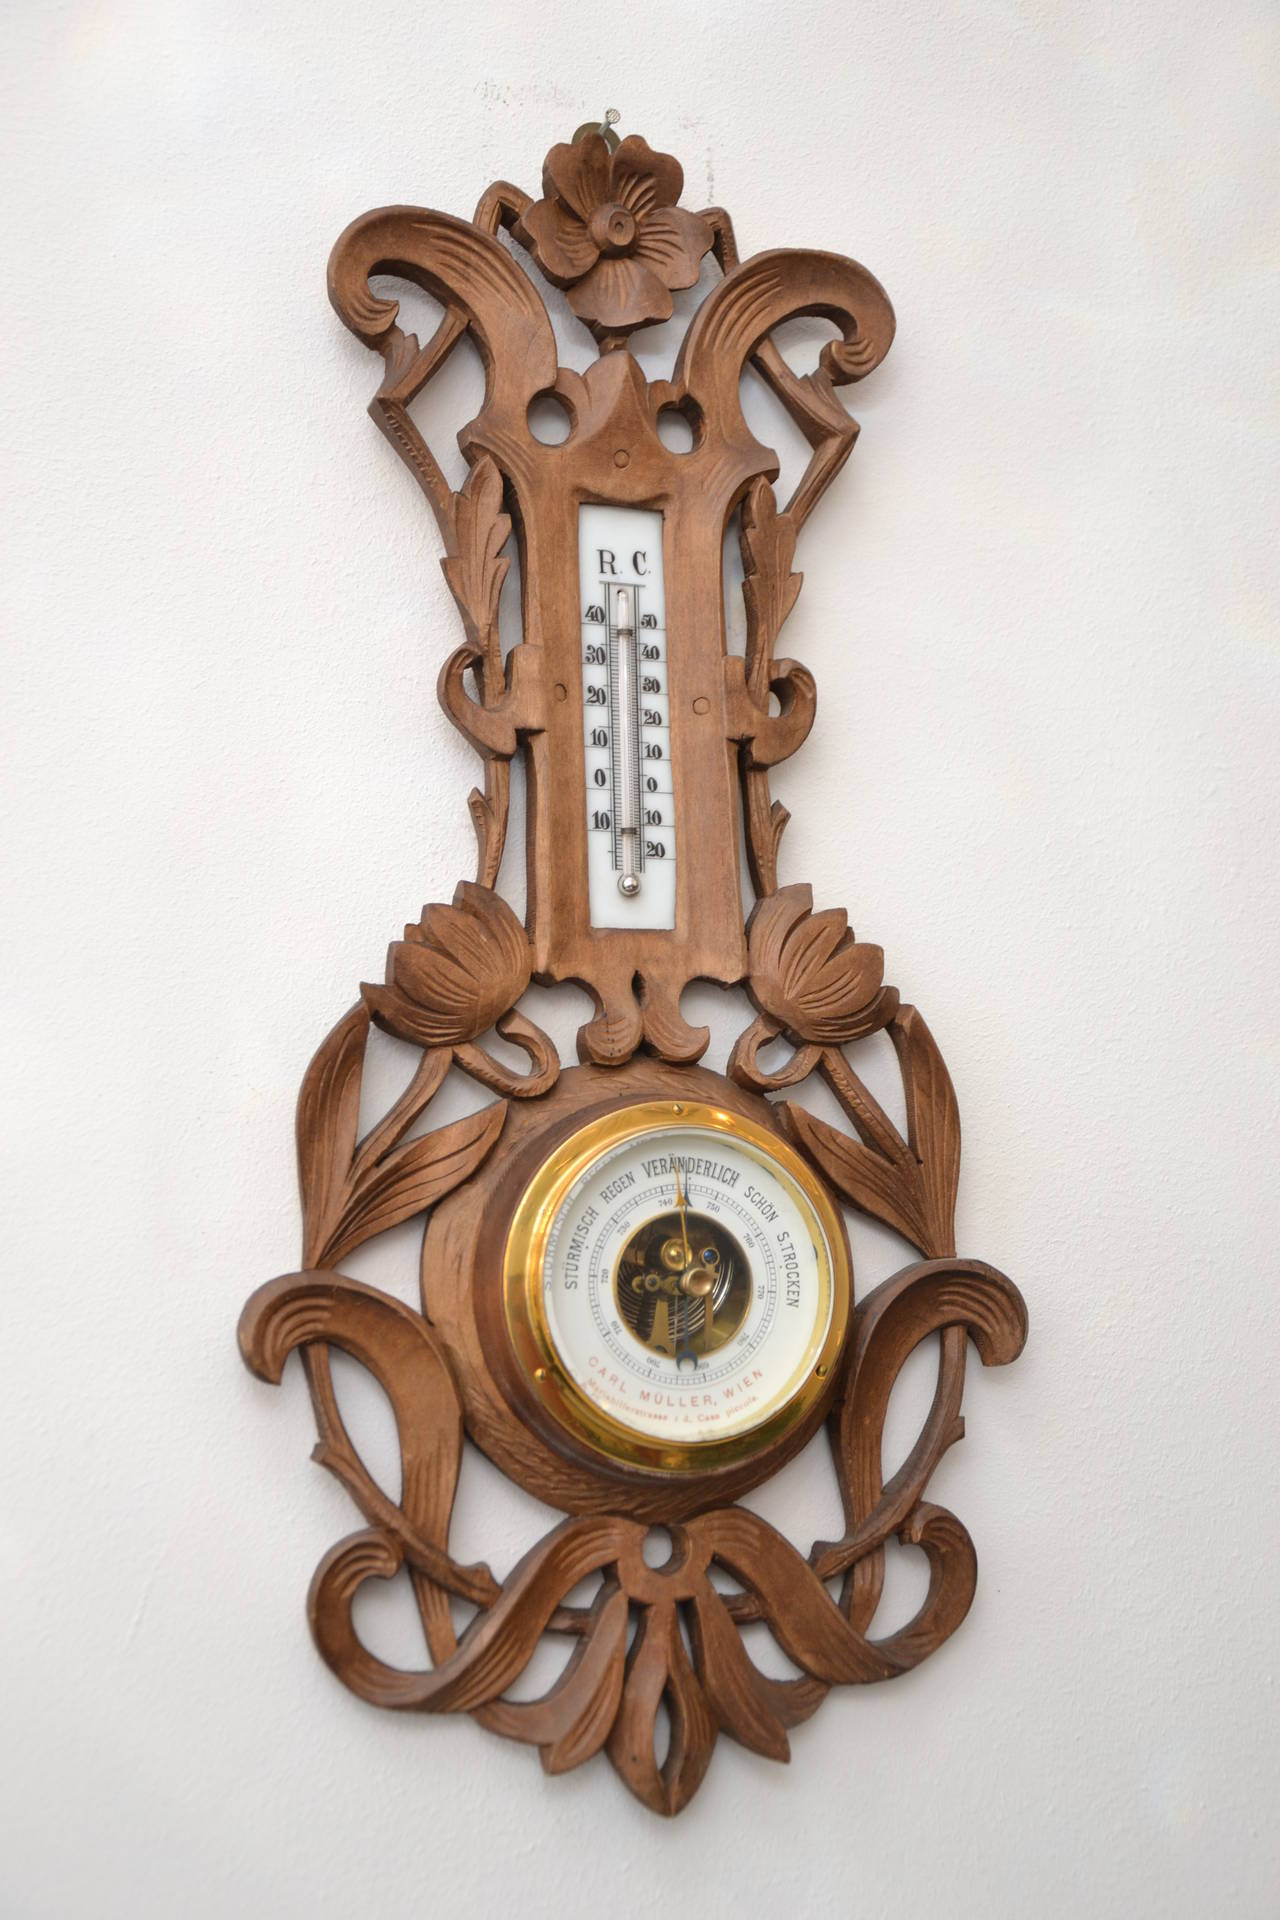 Thermometer and barometer